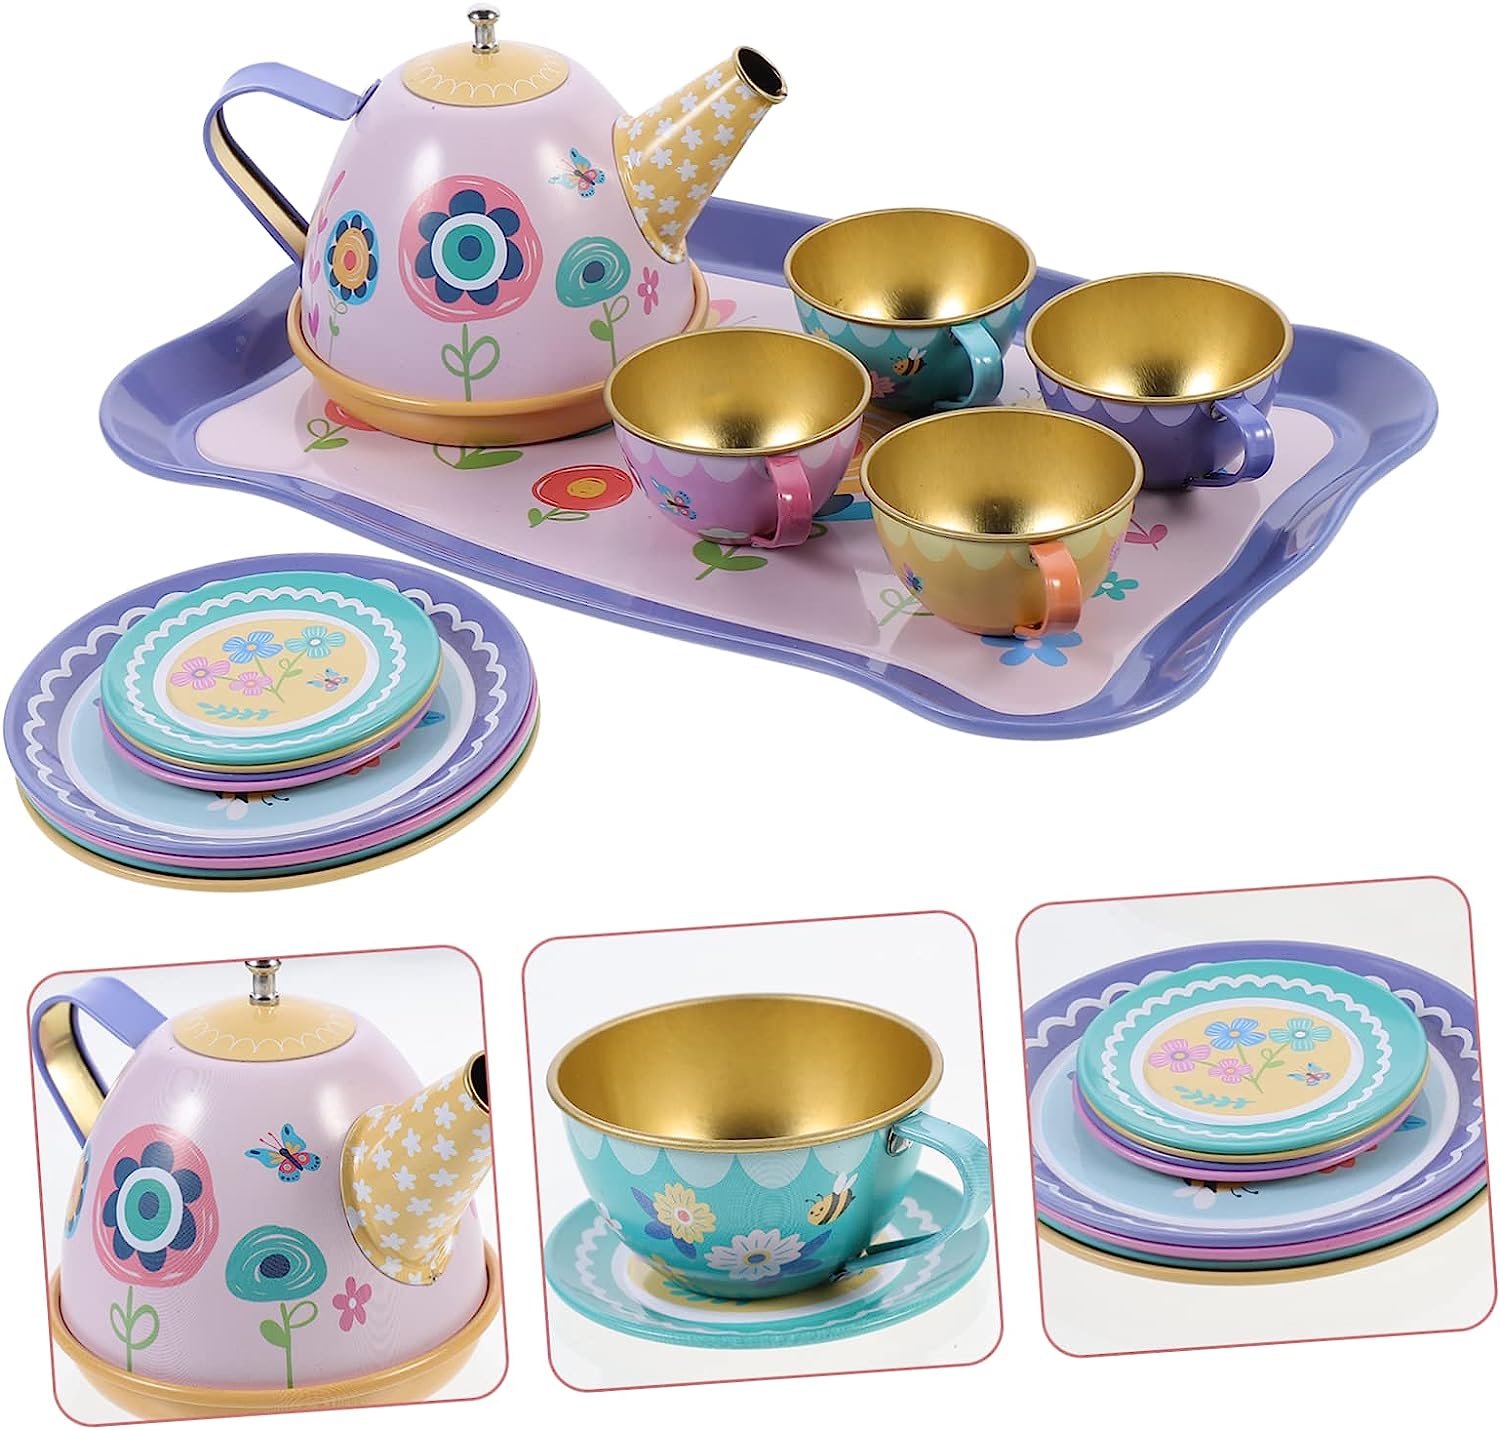 Tea Set Toys Kids Educational Toys Educational Toys for Toddlers Tea Cup Set for Kids Kitchen Toy Playset Princess Tea Time Toy Kids Birthday Party Favor Gift Pretend Play Toy Set